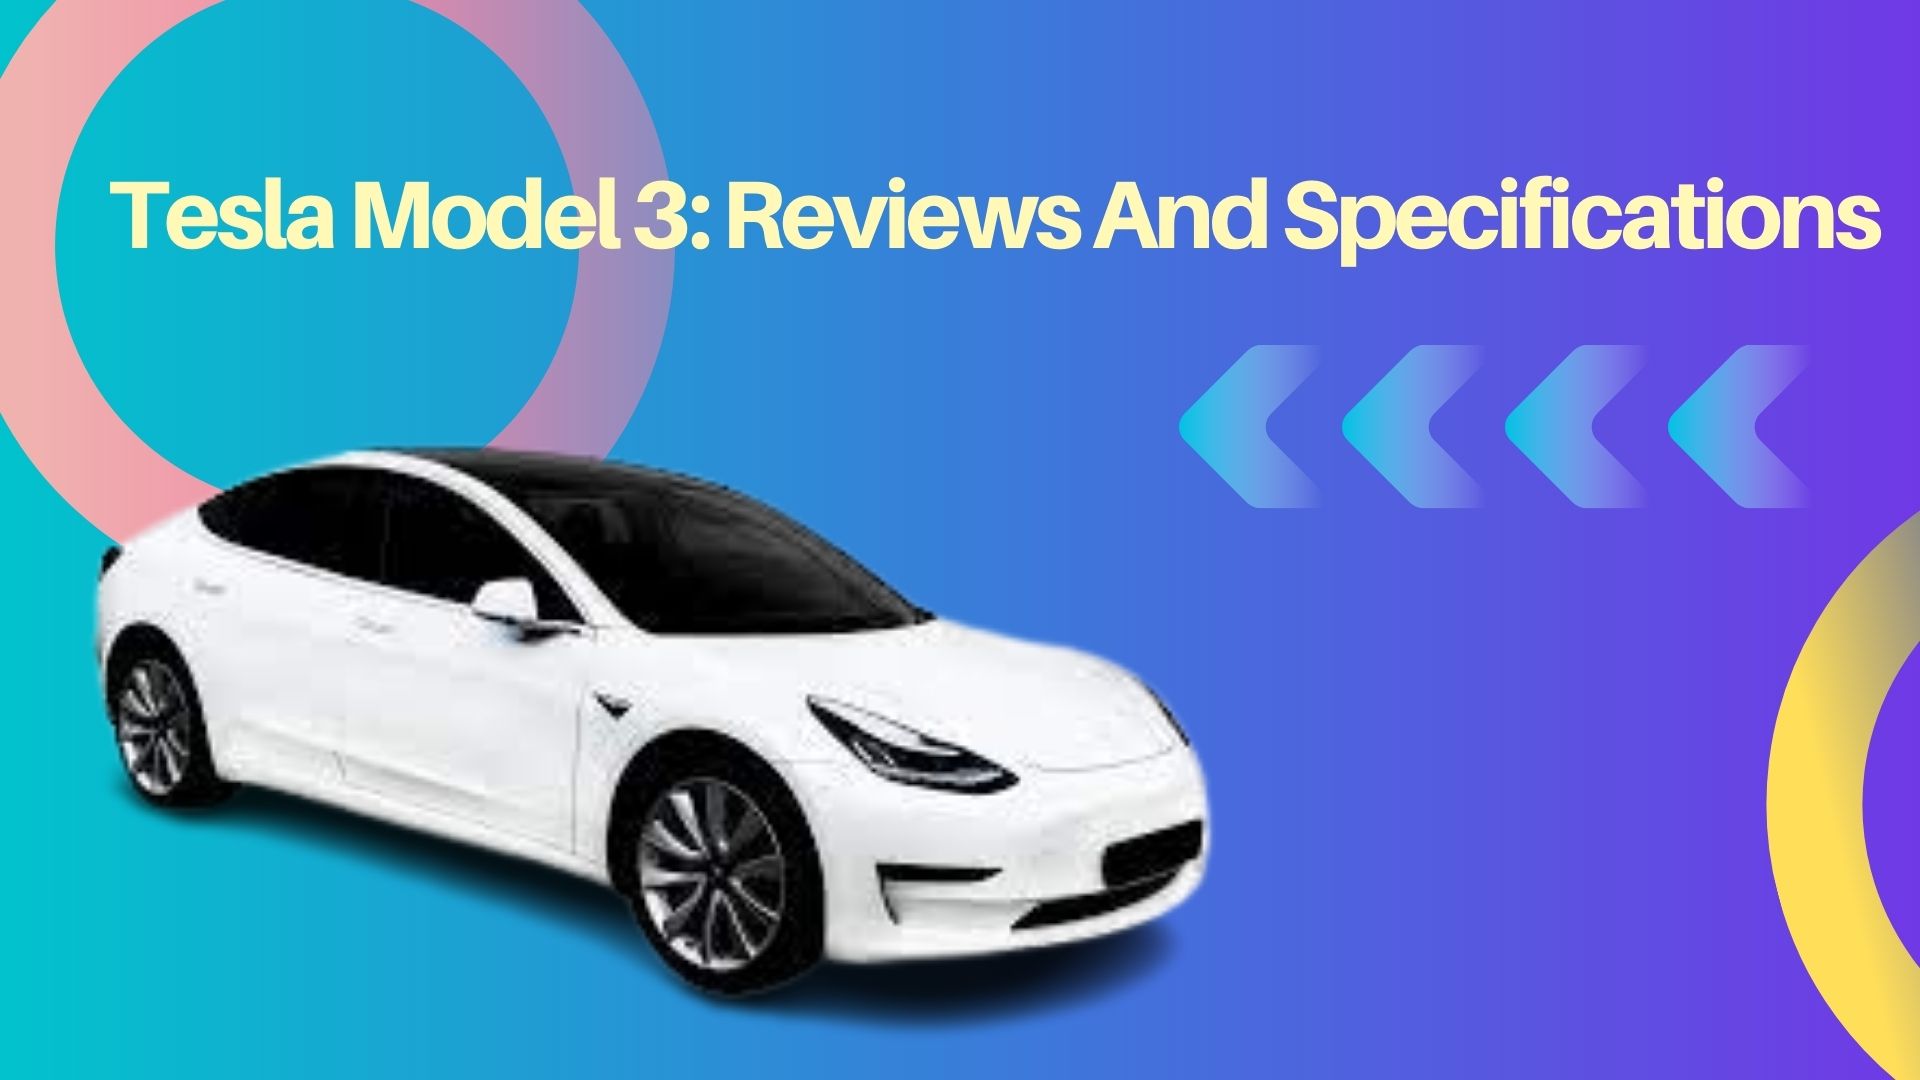 Consumer Reports: Tesla's Model 3 most satisfying car